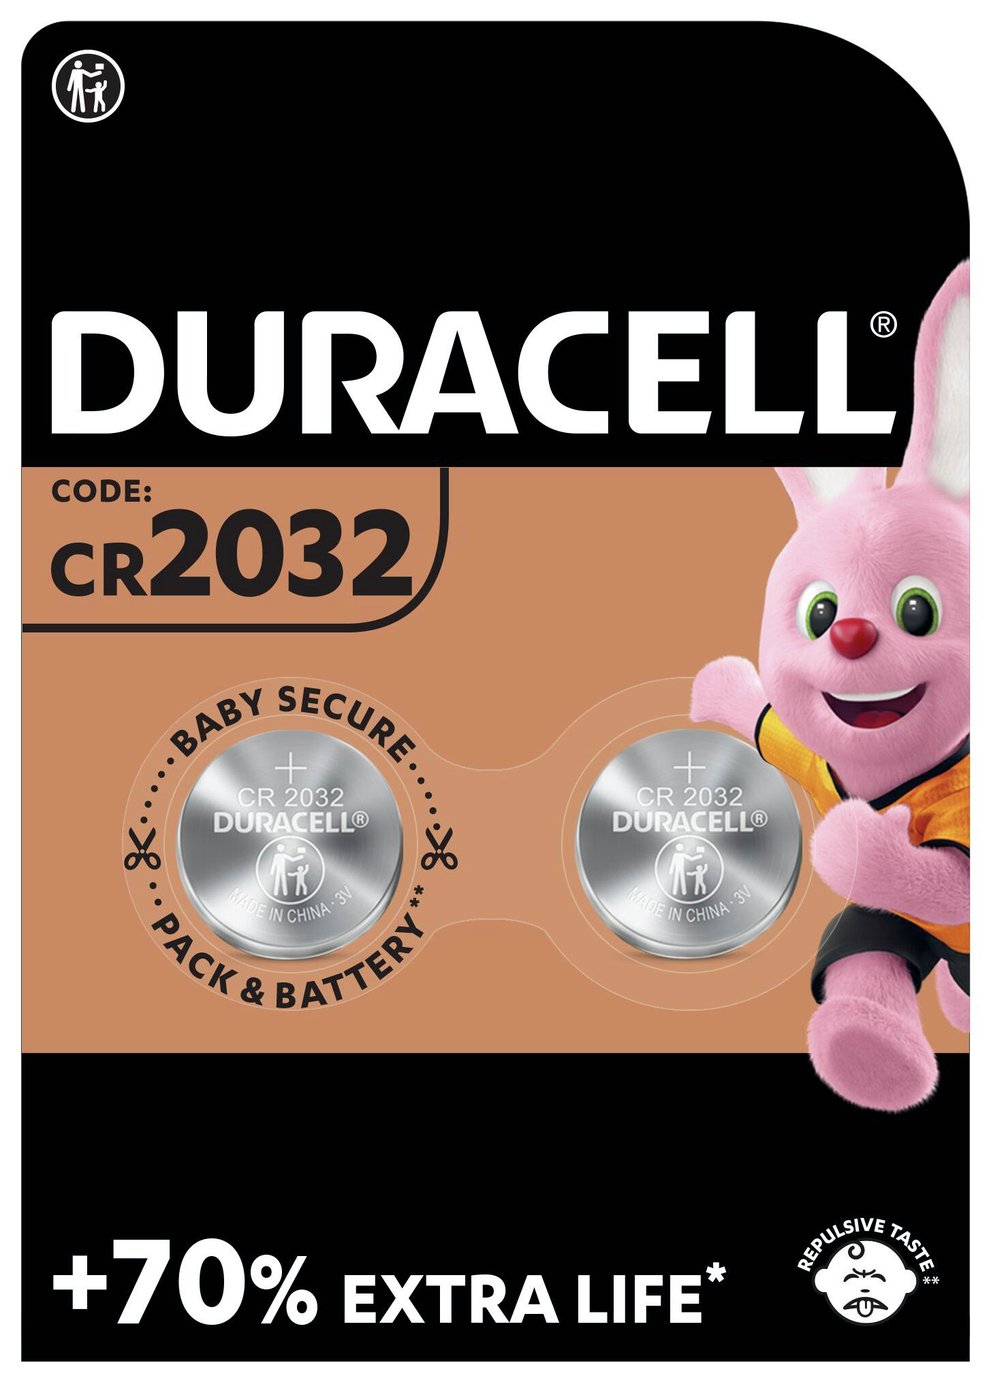 Duracell 2032 Lithium Coin Batteries 3V (CR2032) - Pack of 2